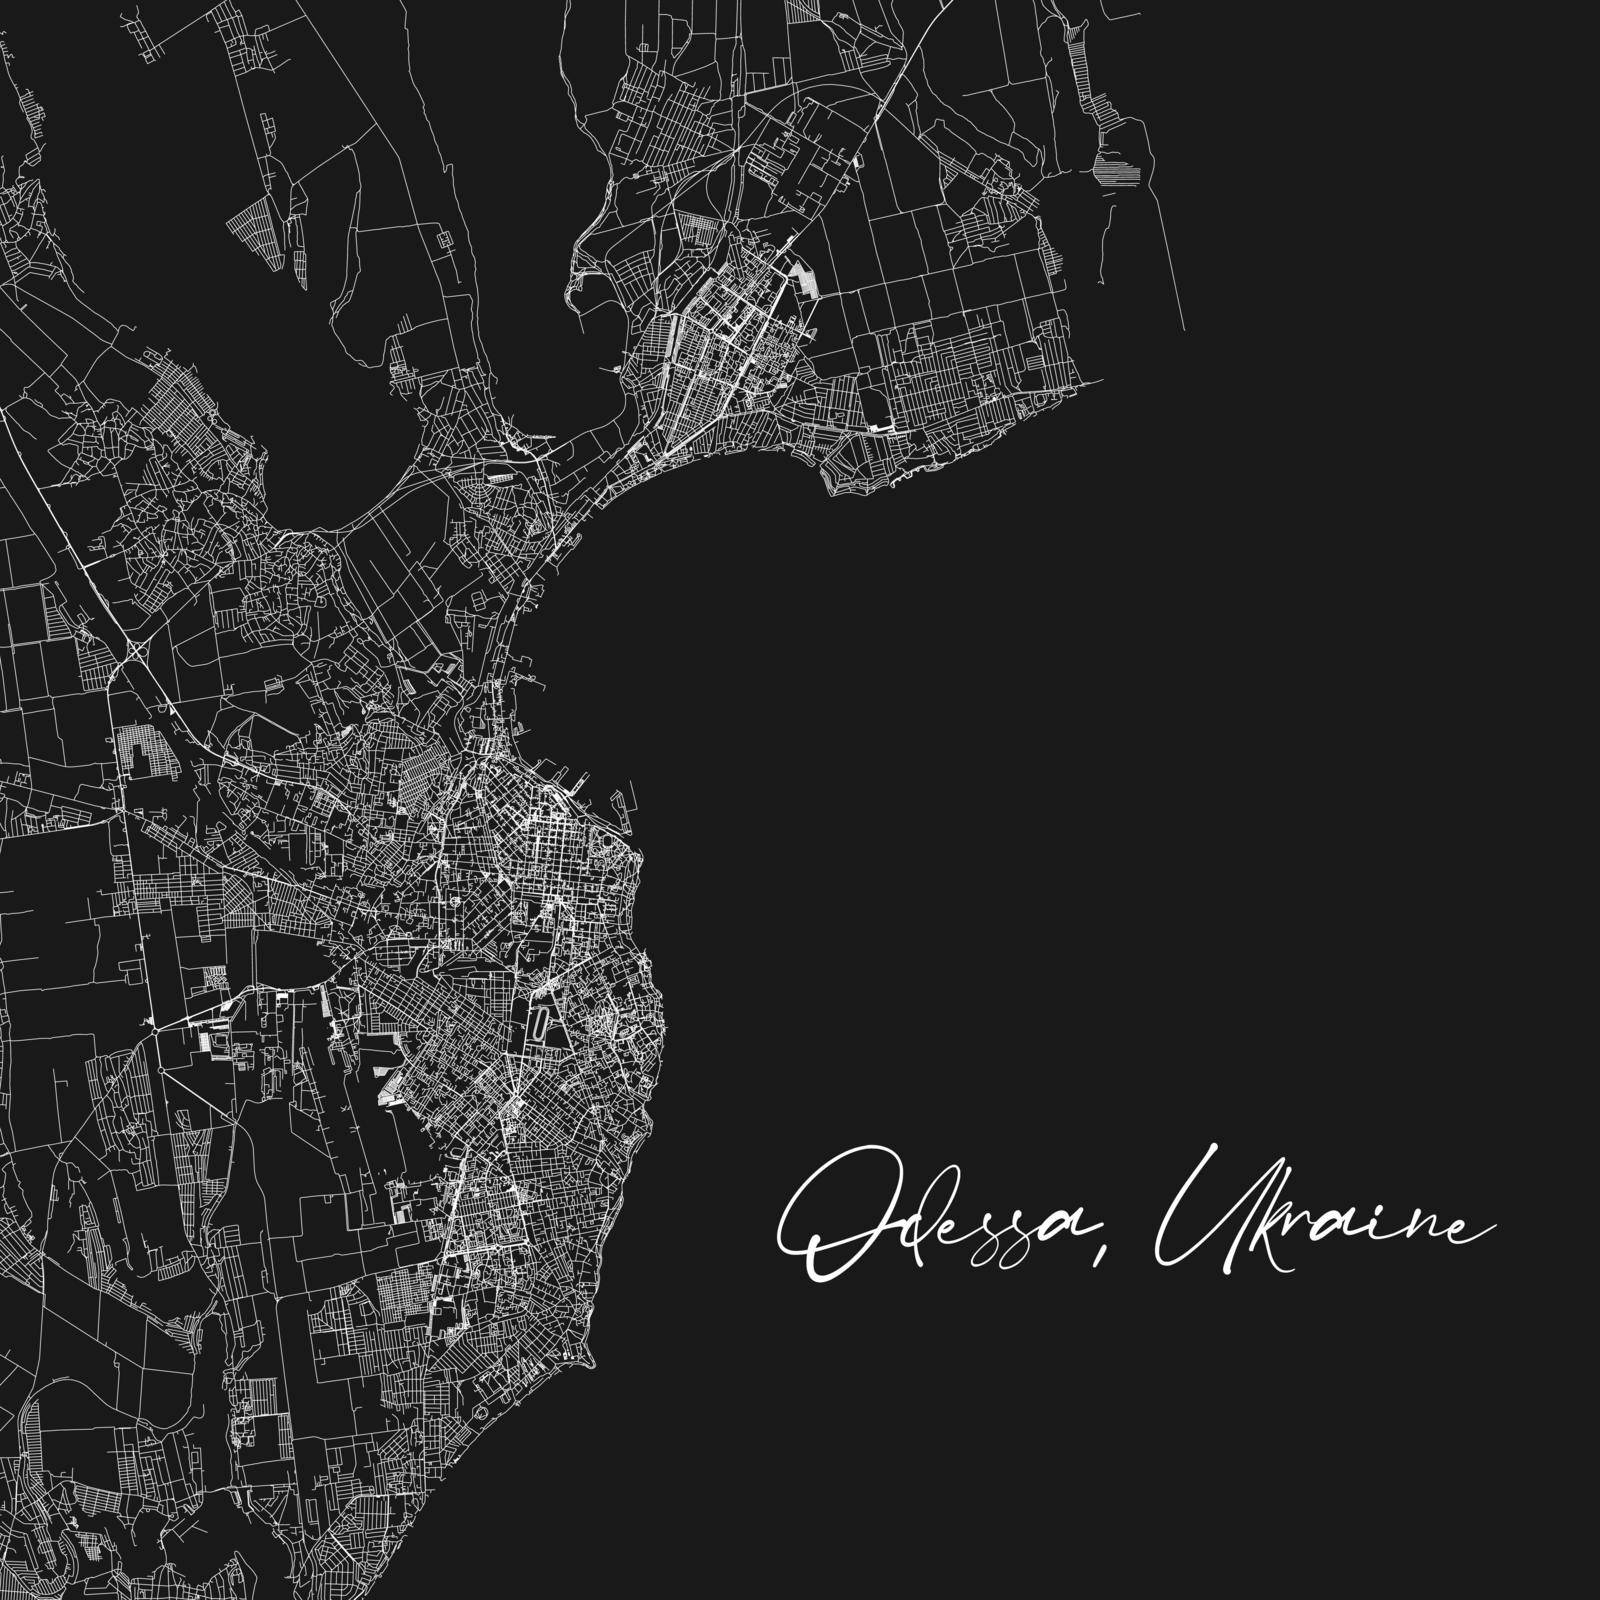 Odesa Odessa black and white city map. Vector illustration, Odessa map grayscale art poster. Street map image with roads,